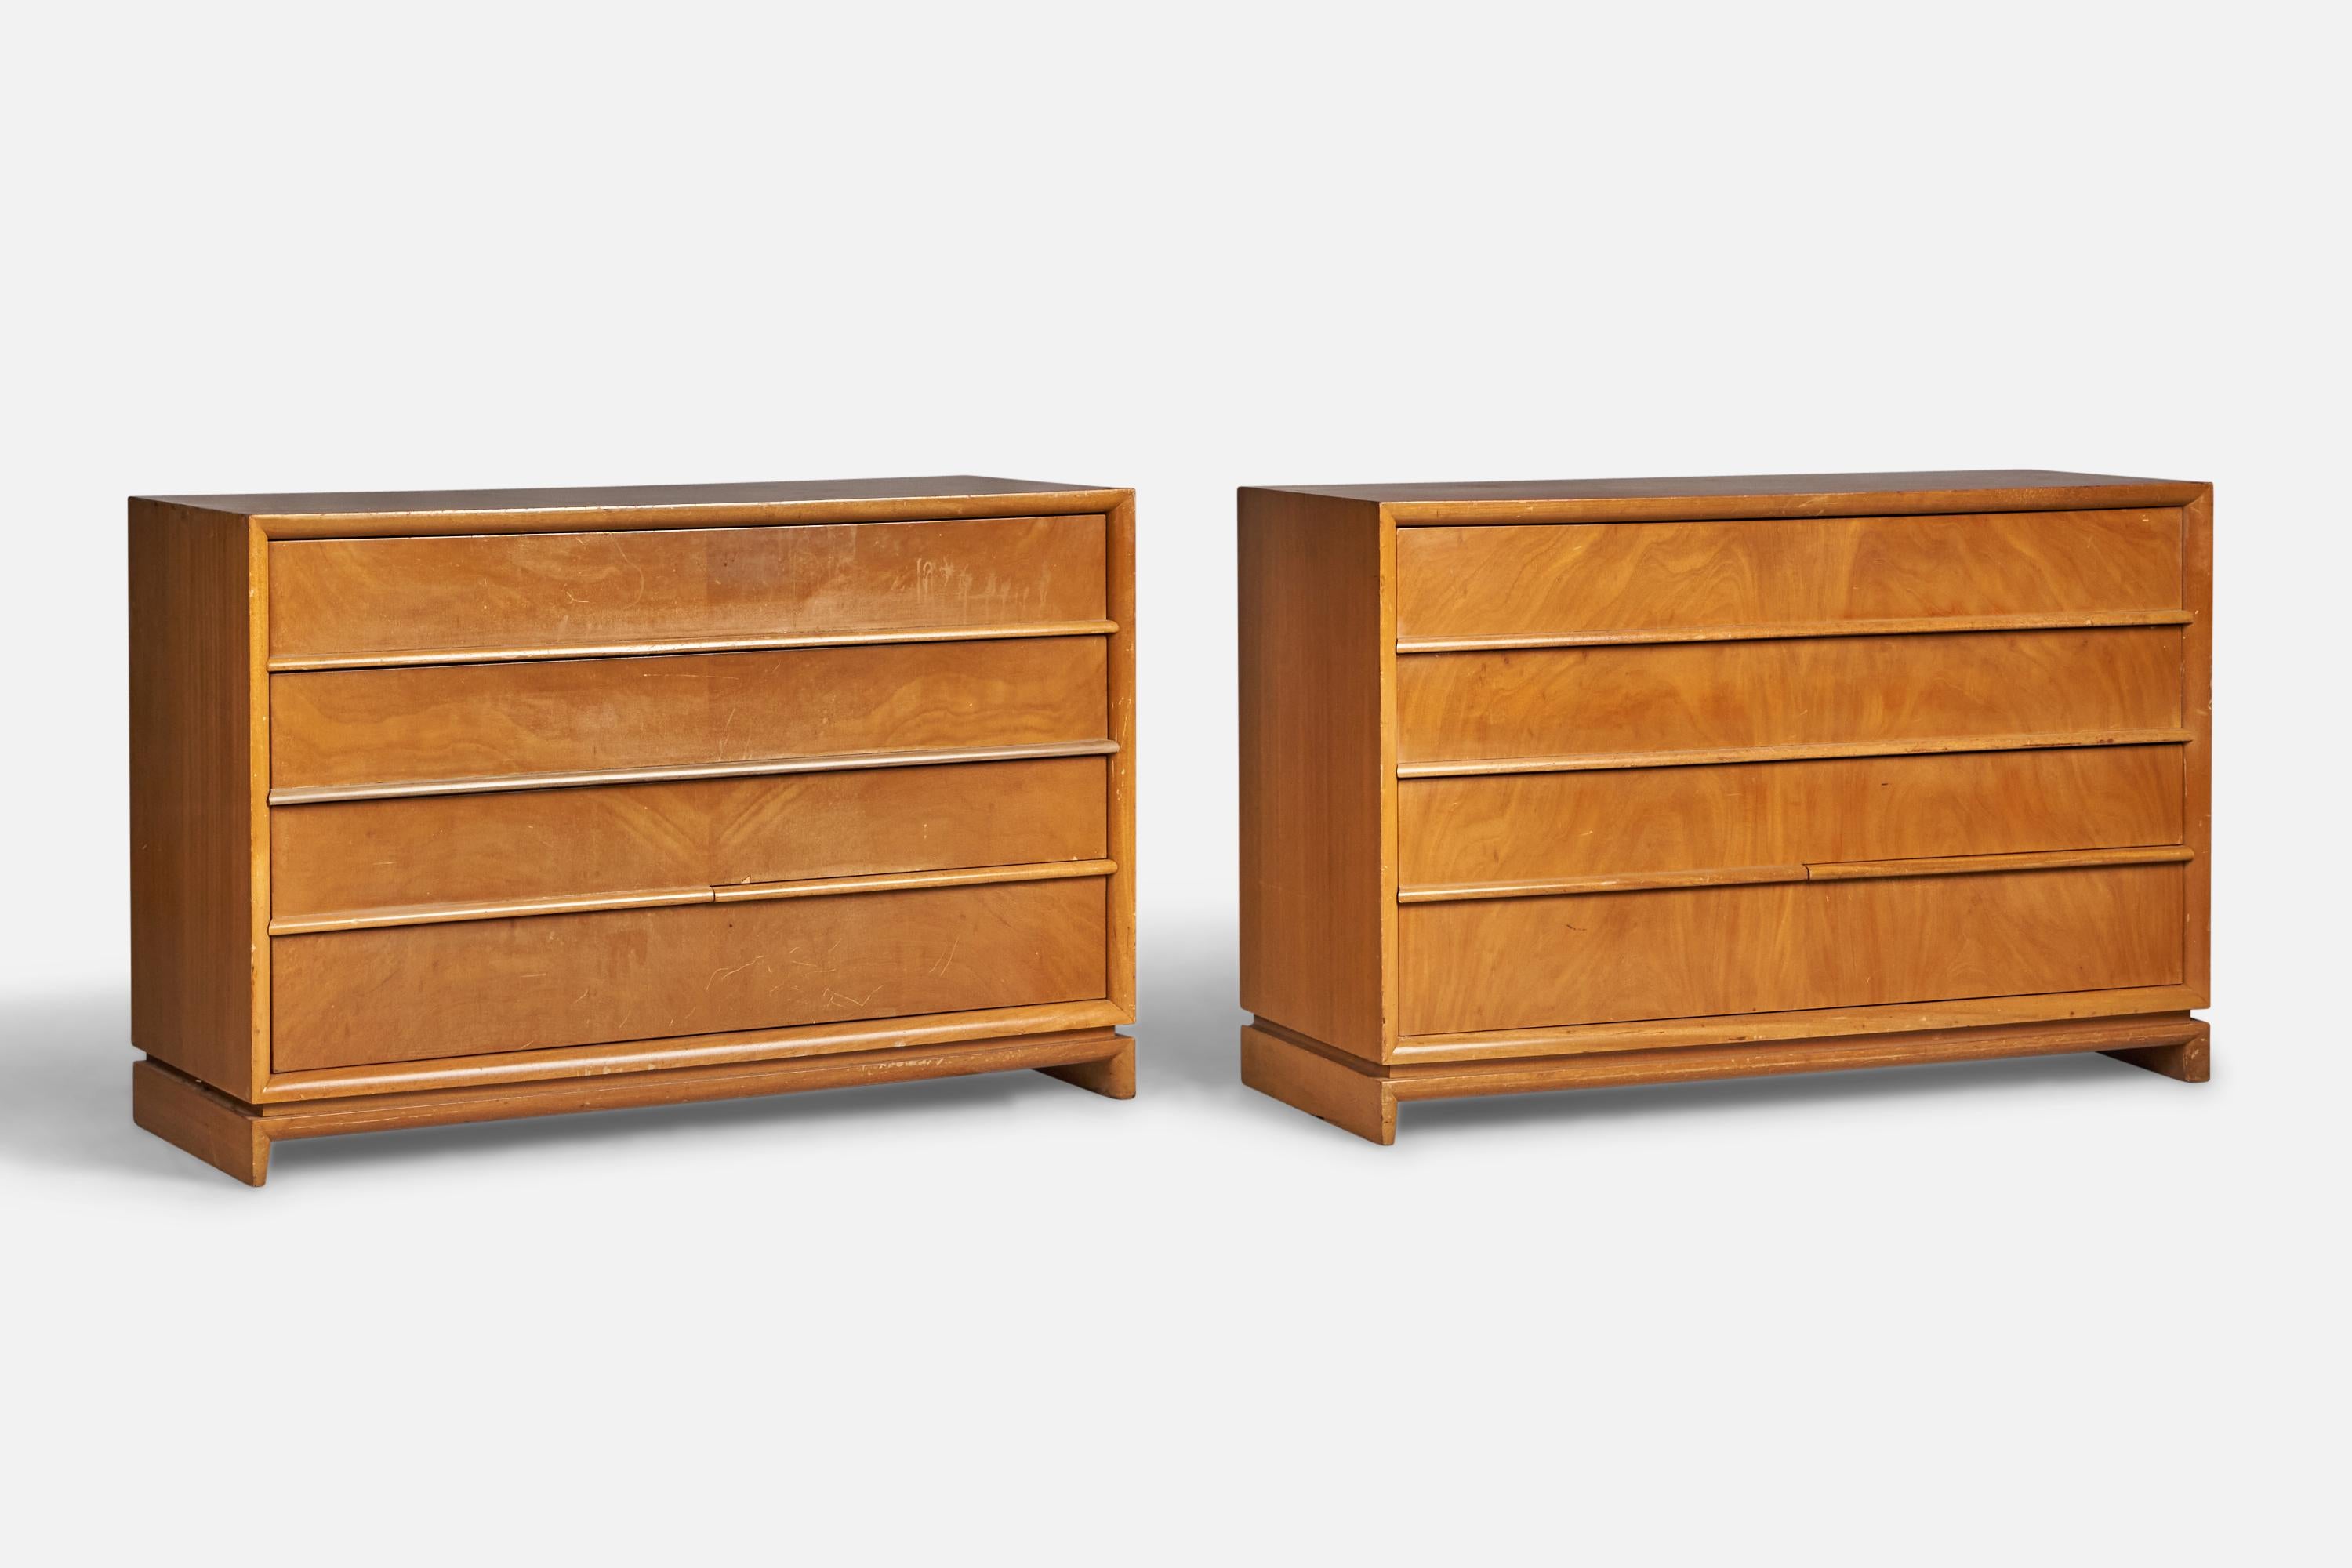 A pair of walnut dressers designed and produced by Red Lion Furniture, USA, 1940s.
Condition: Touch ups carried out. Stains and marks present more prominently so on tops. 